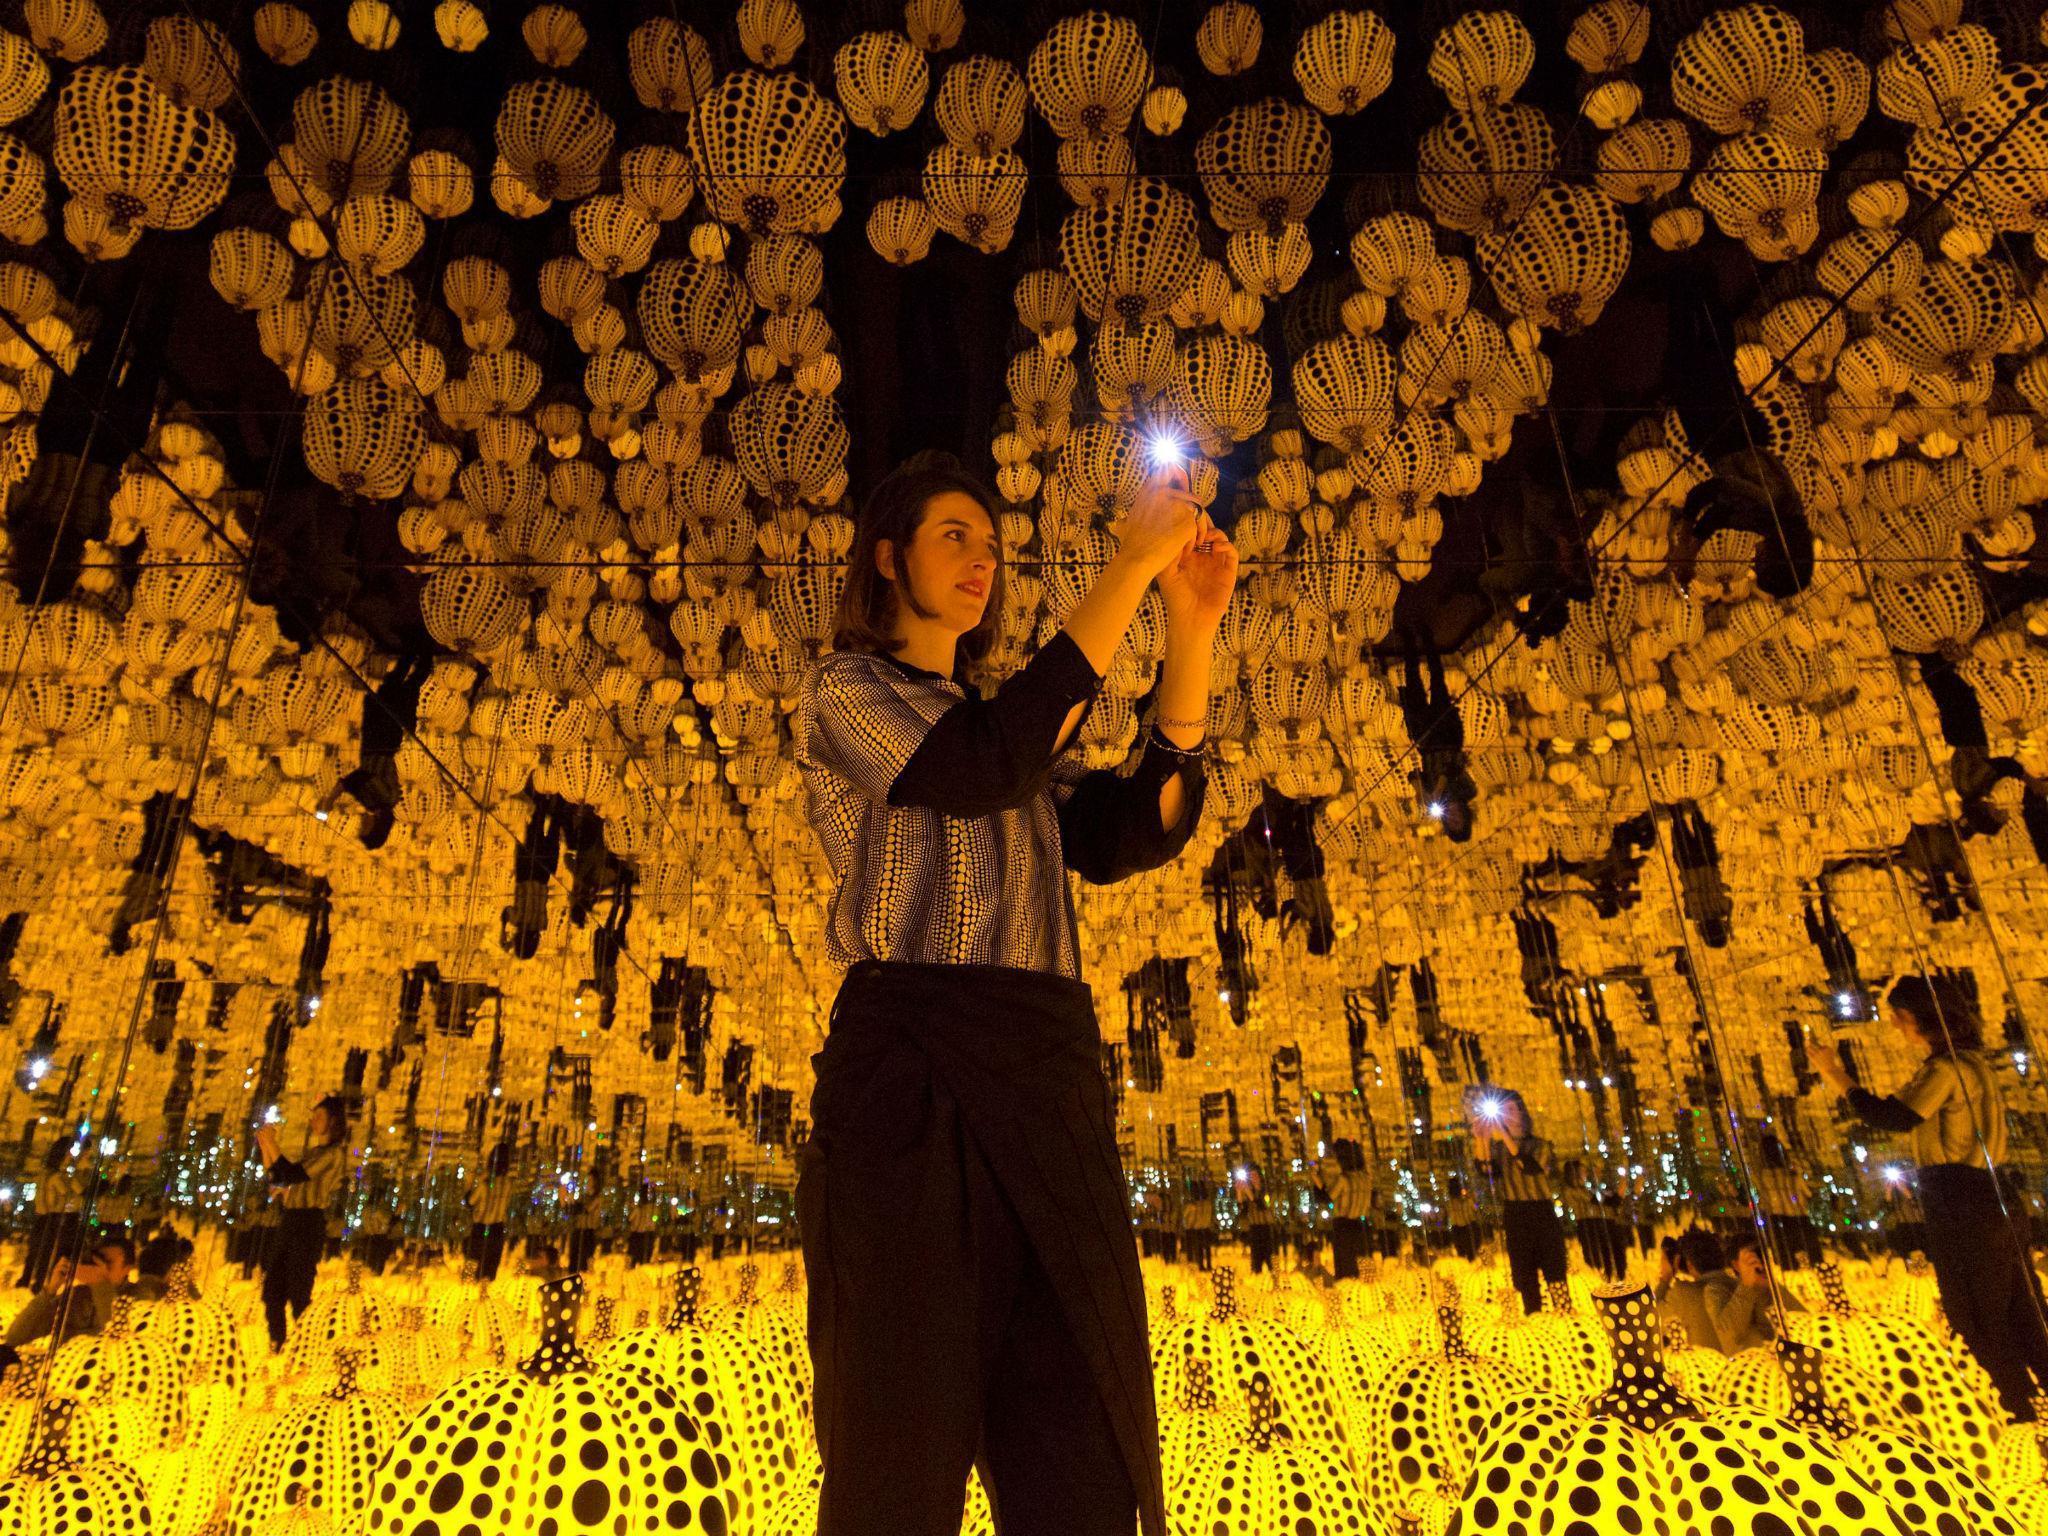 A gallery assistant poses for a photo with 'All the Eternal Love I Have for the Pumpkins' by Yayoi Kusama